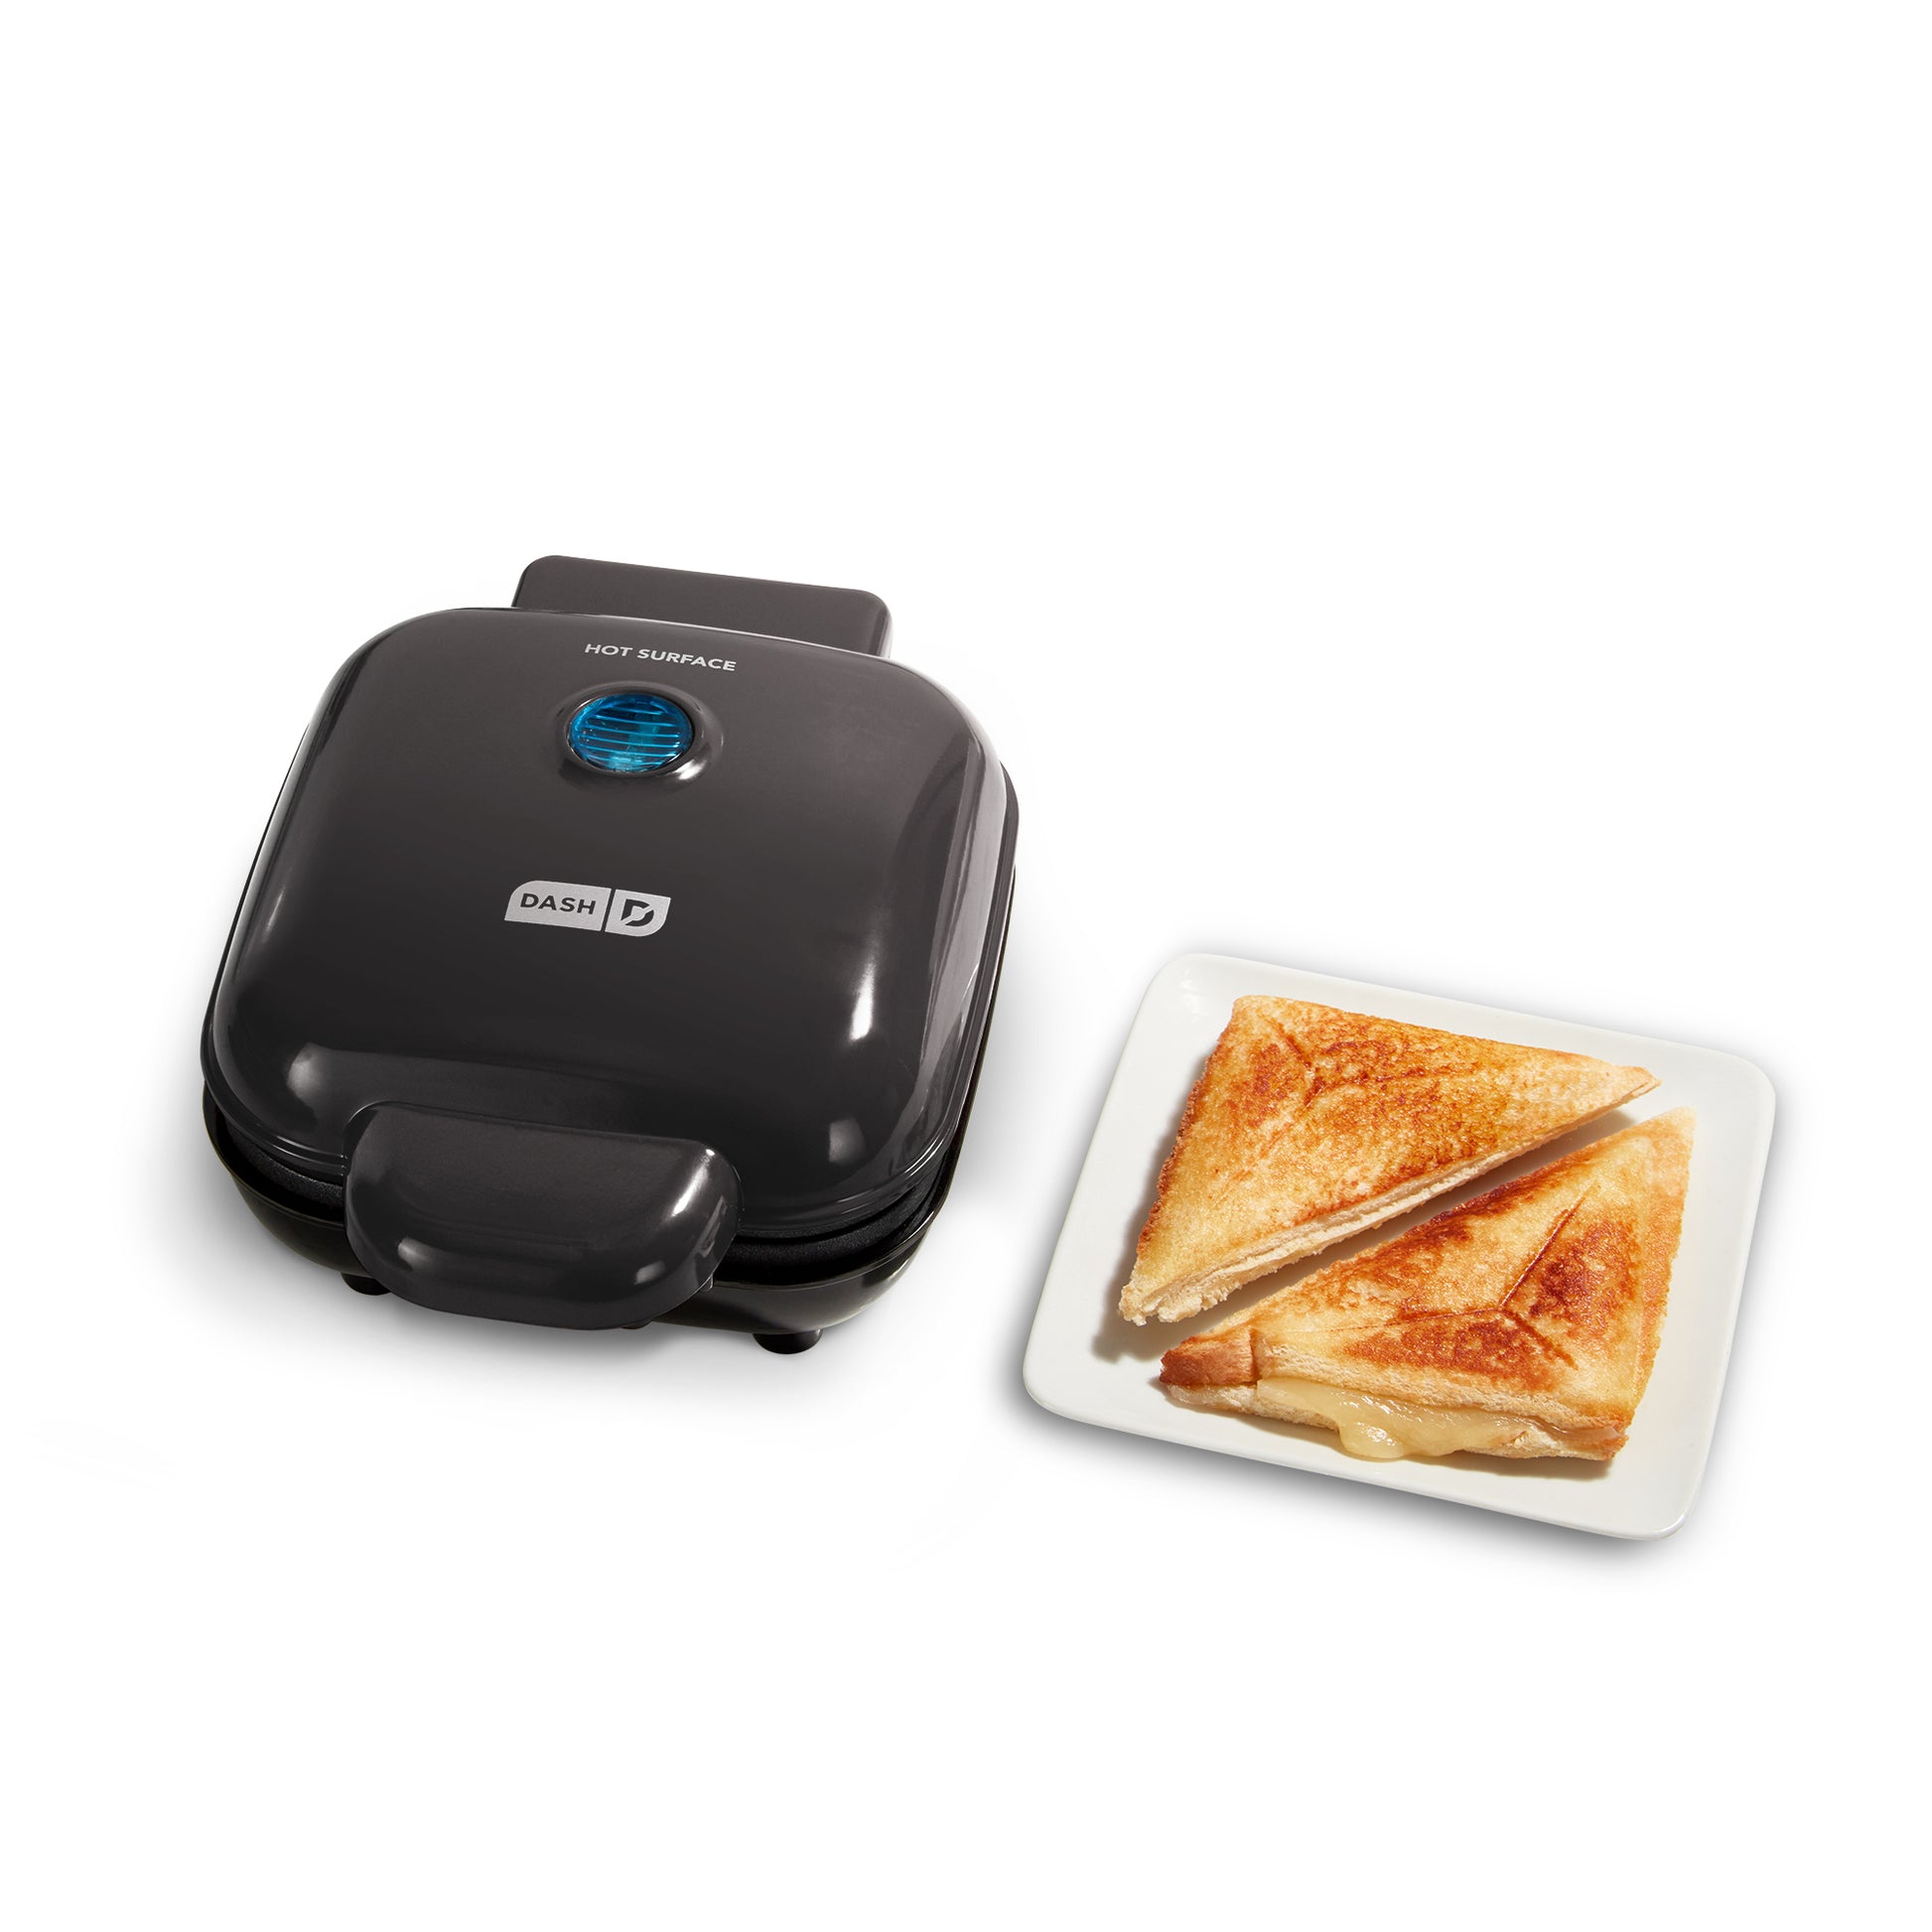 SK907 Home 7 in 1 Multifunction Electric Dash Sandwich Maker